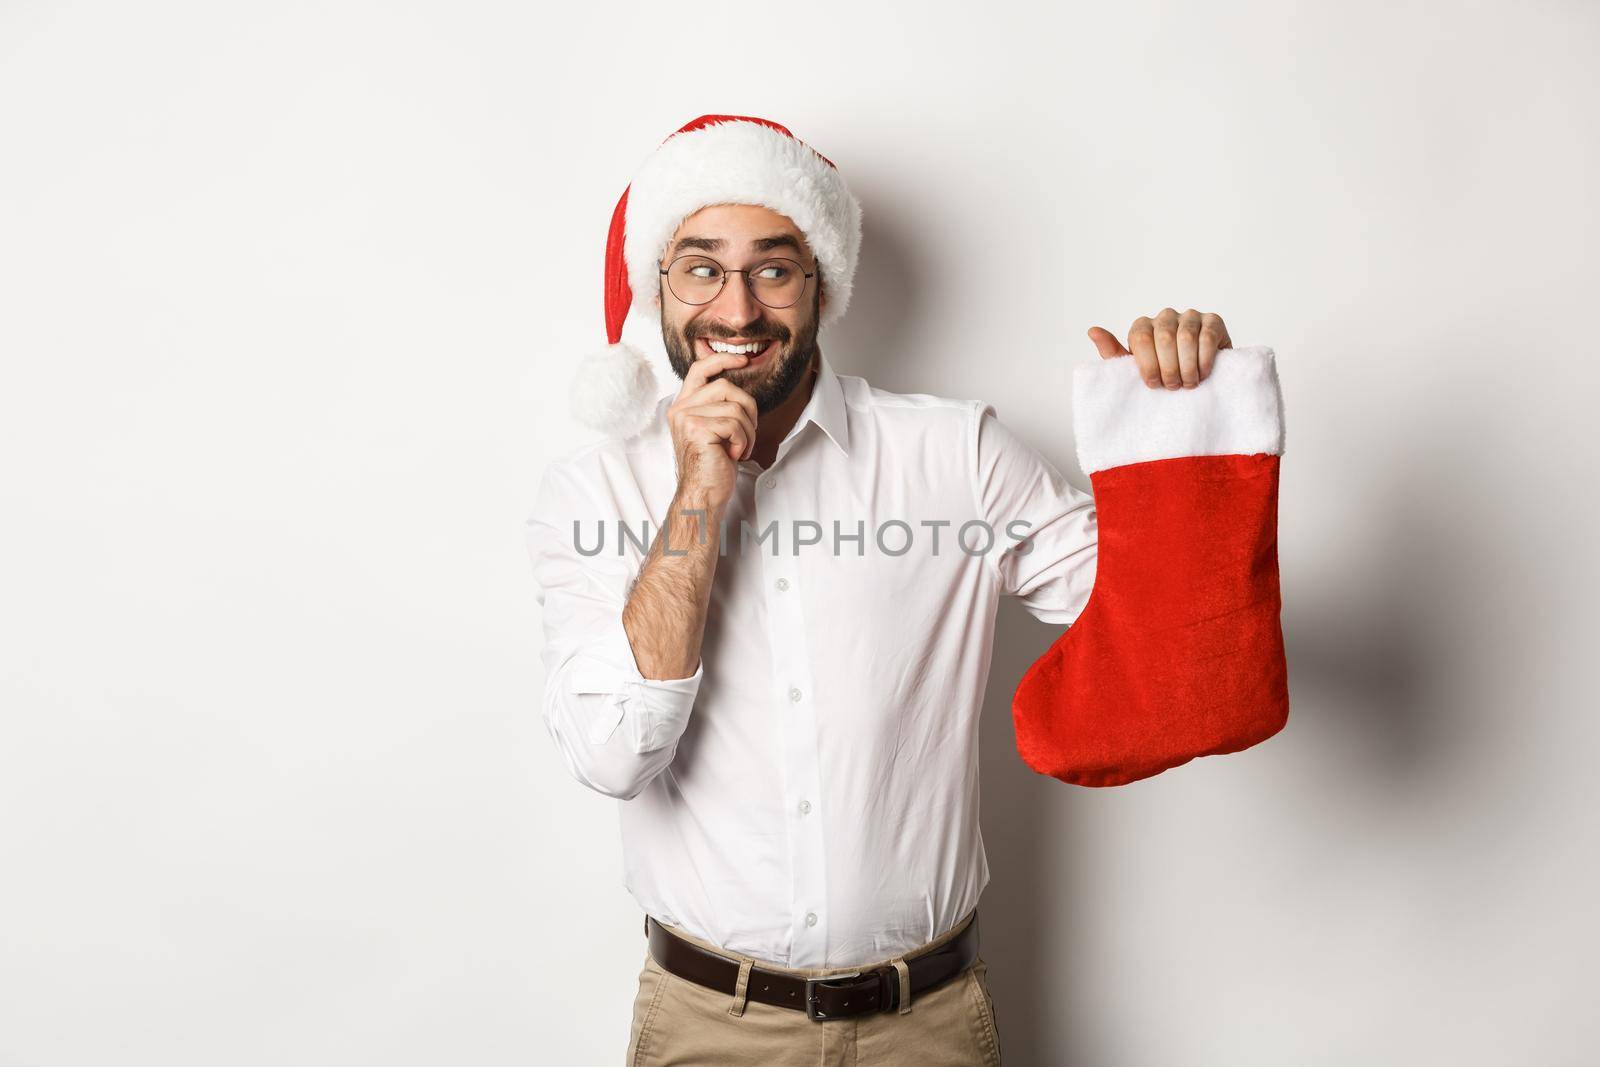 Merry christmas, holidays concept. Adult man looking happy and curious at xmas sock, receive gifts, wearing santa hat, white background.